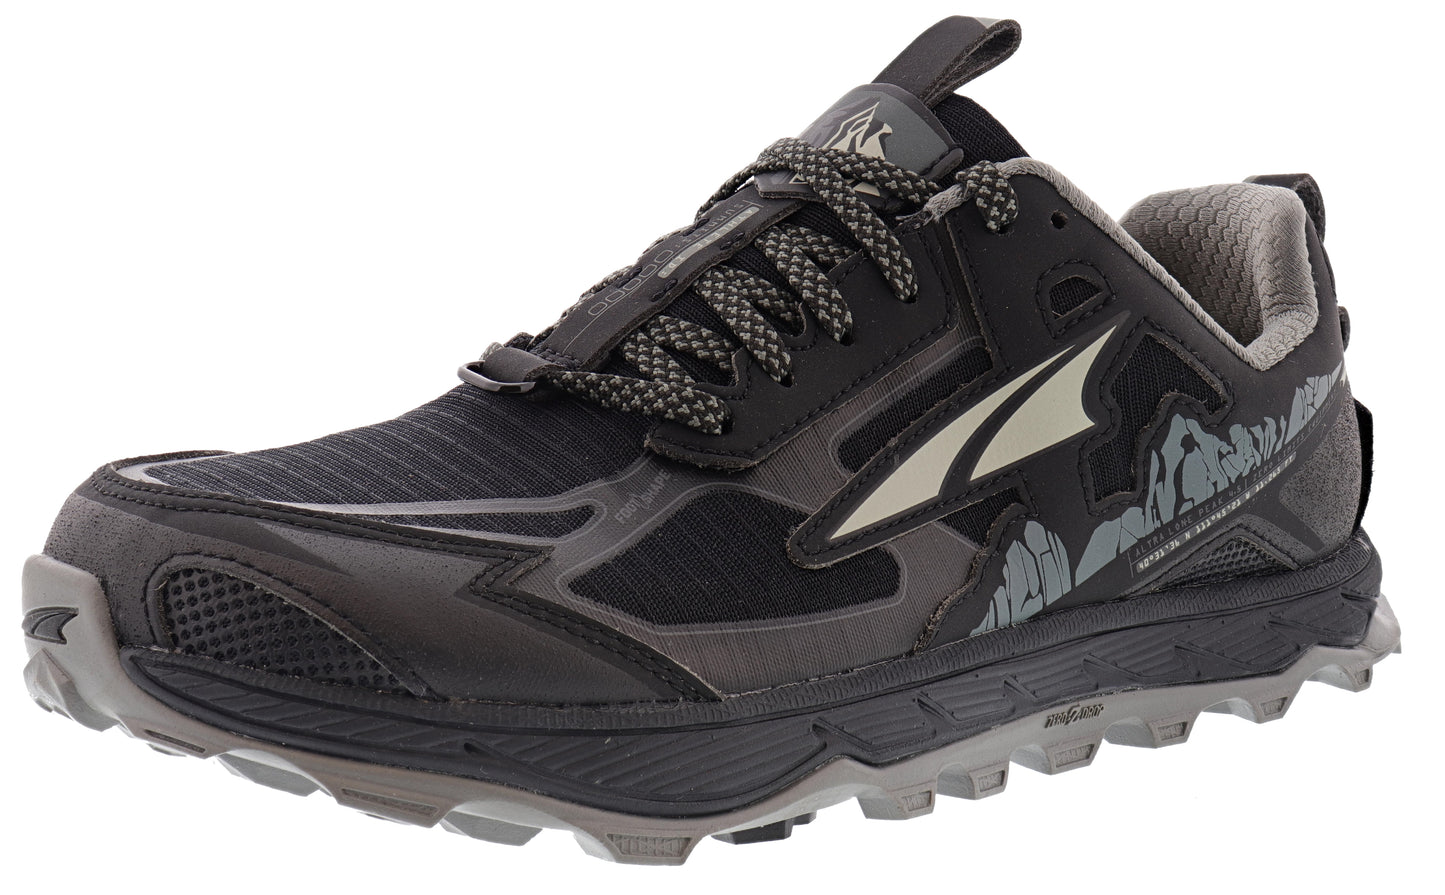 Lateral of Black Altra Women's Lone Peak 4.5 Lightweight Trail Running Shoes